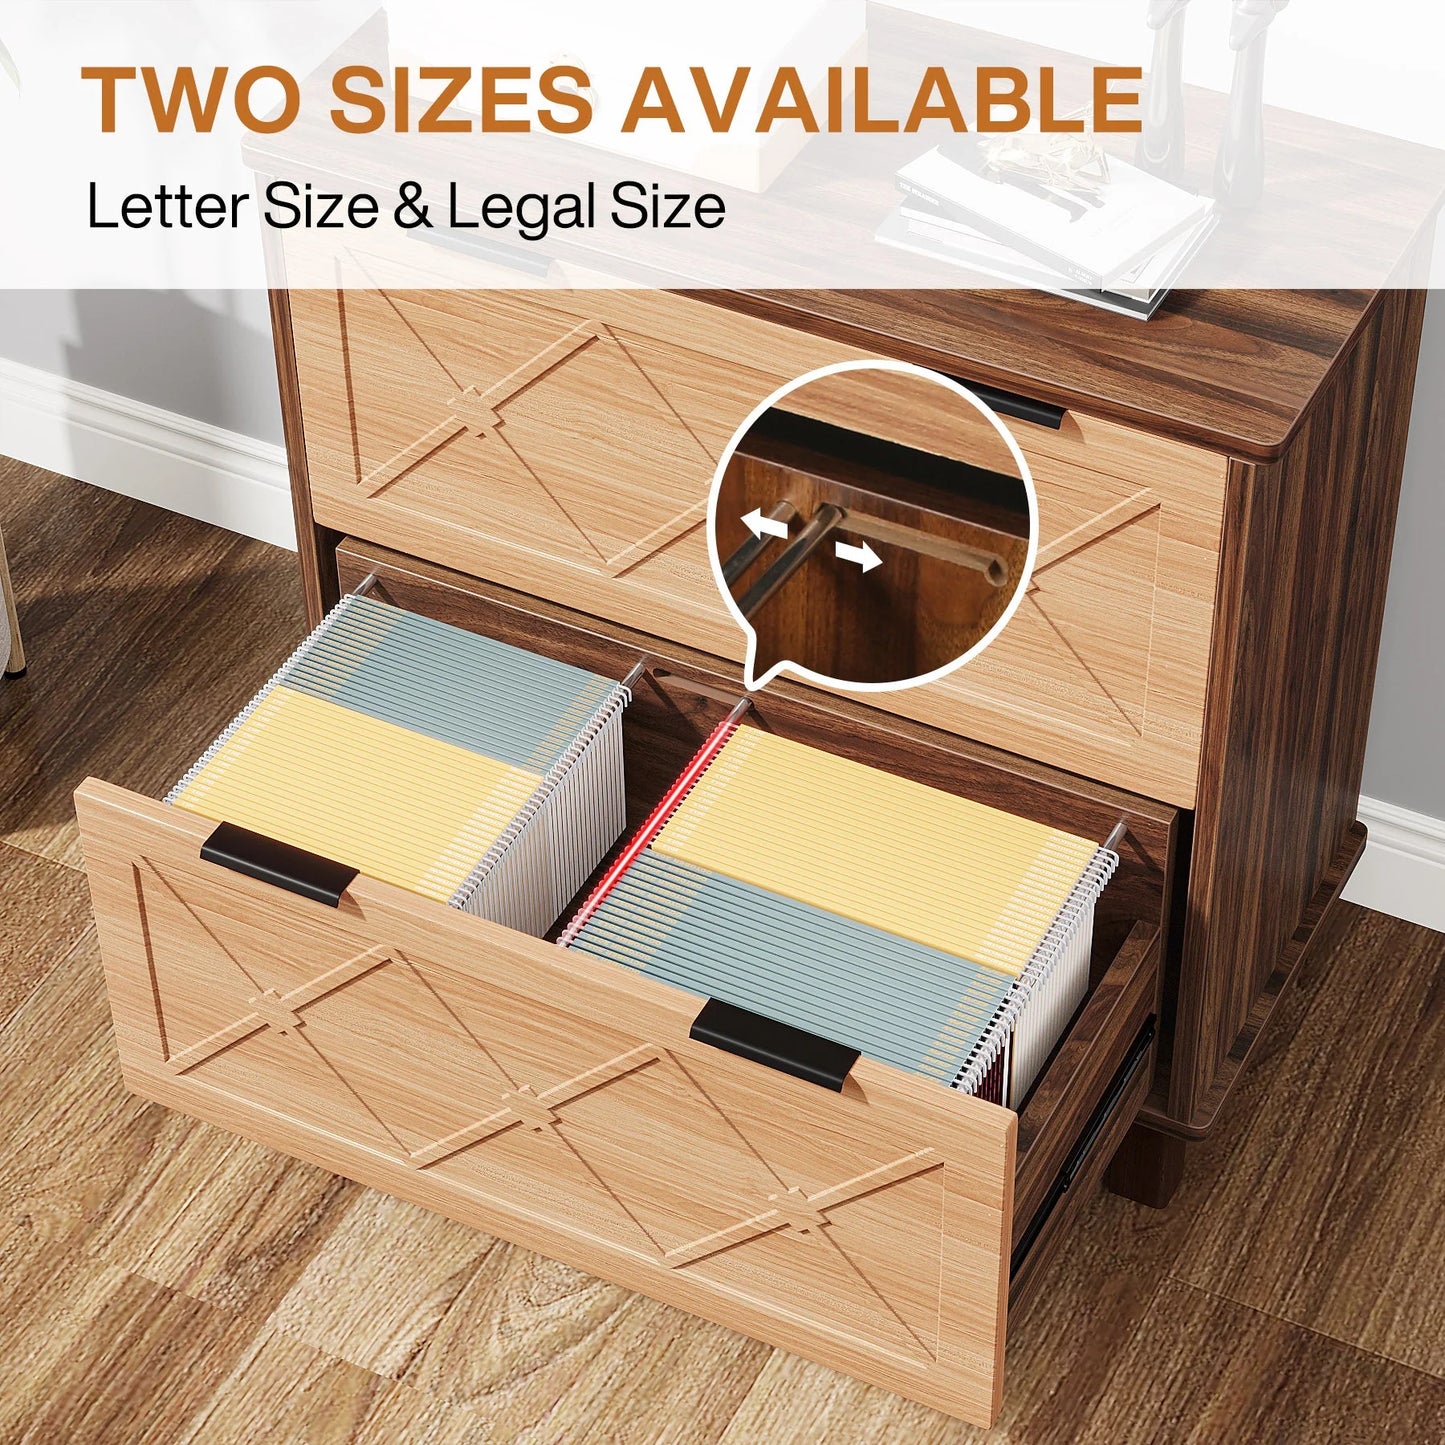 2-Drawer File Cabinet, Wood Storage Cabinet Printer Stand for Home Office